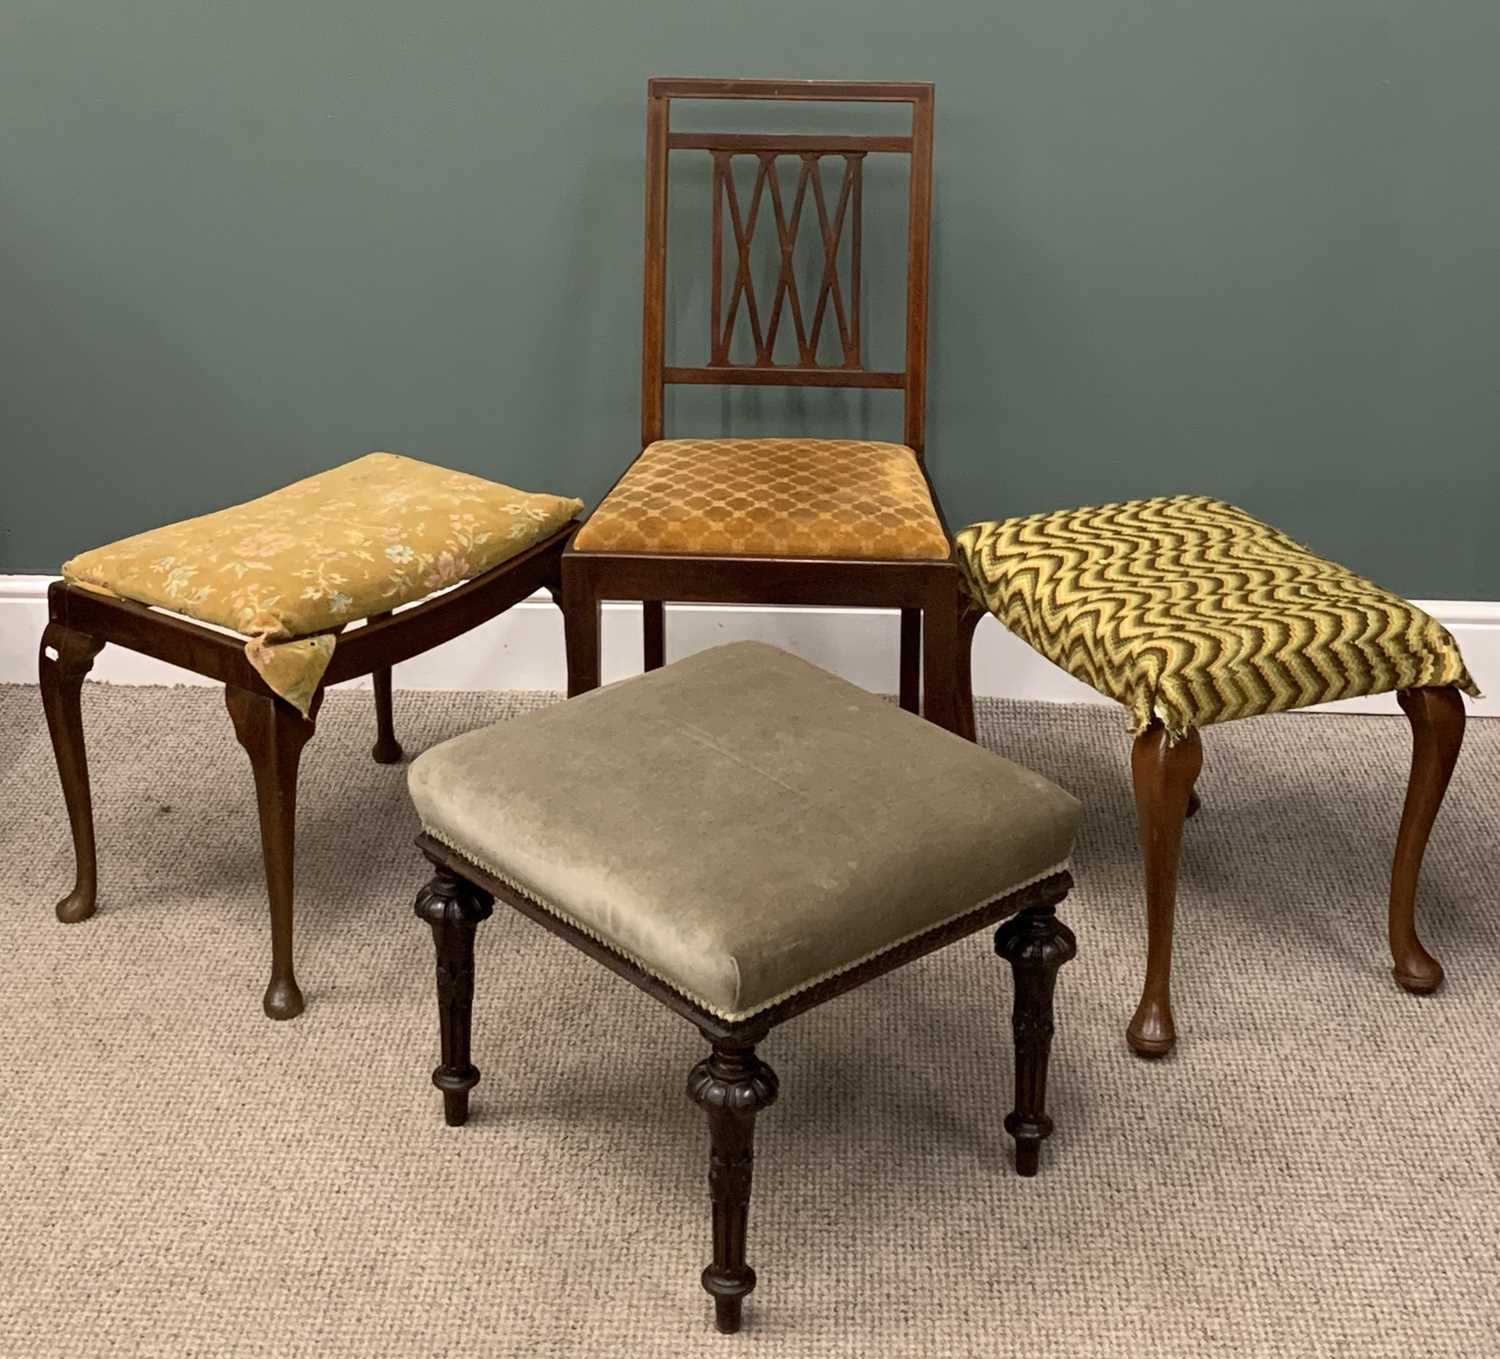 THREE VINTAGE UPHOLSTERED FOOT & OTHER STOOLS / INLAID MAHOGANY BEDROOM CHAIR Provenance: Private